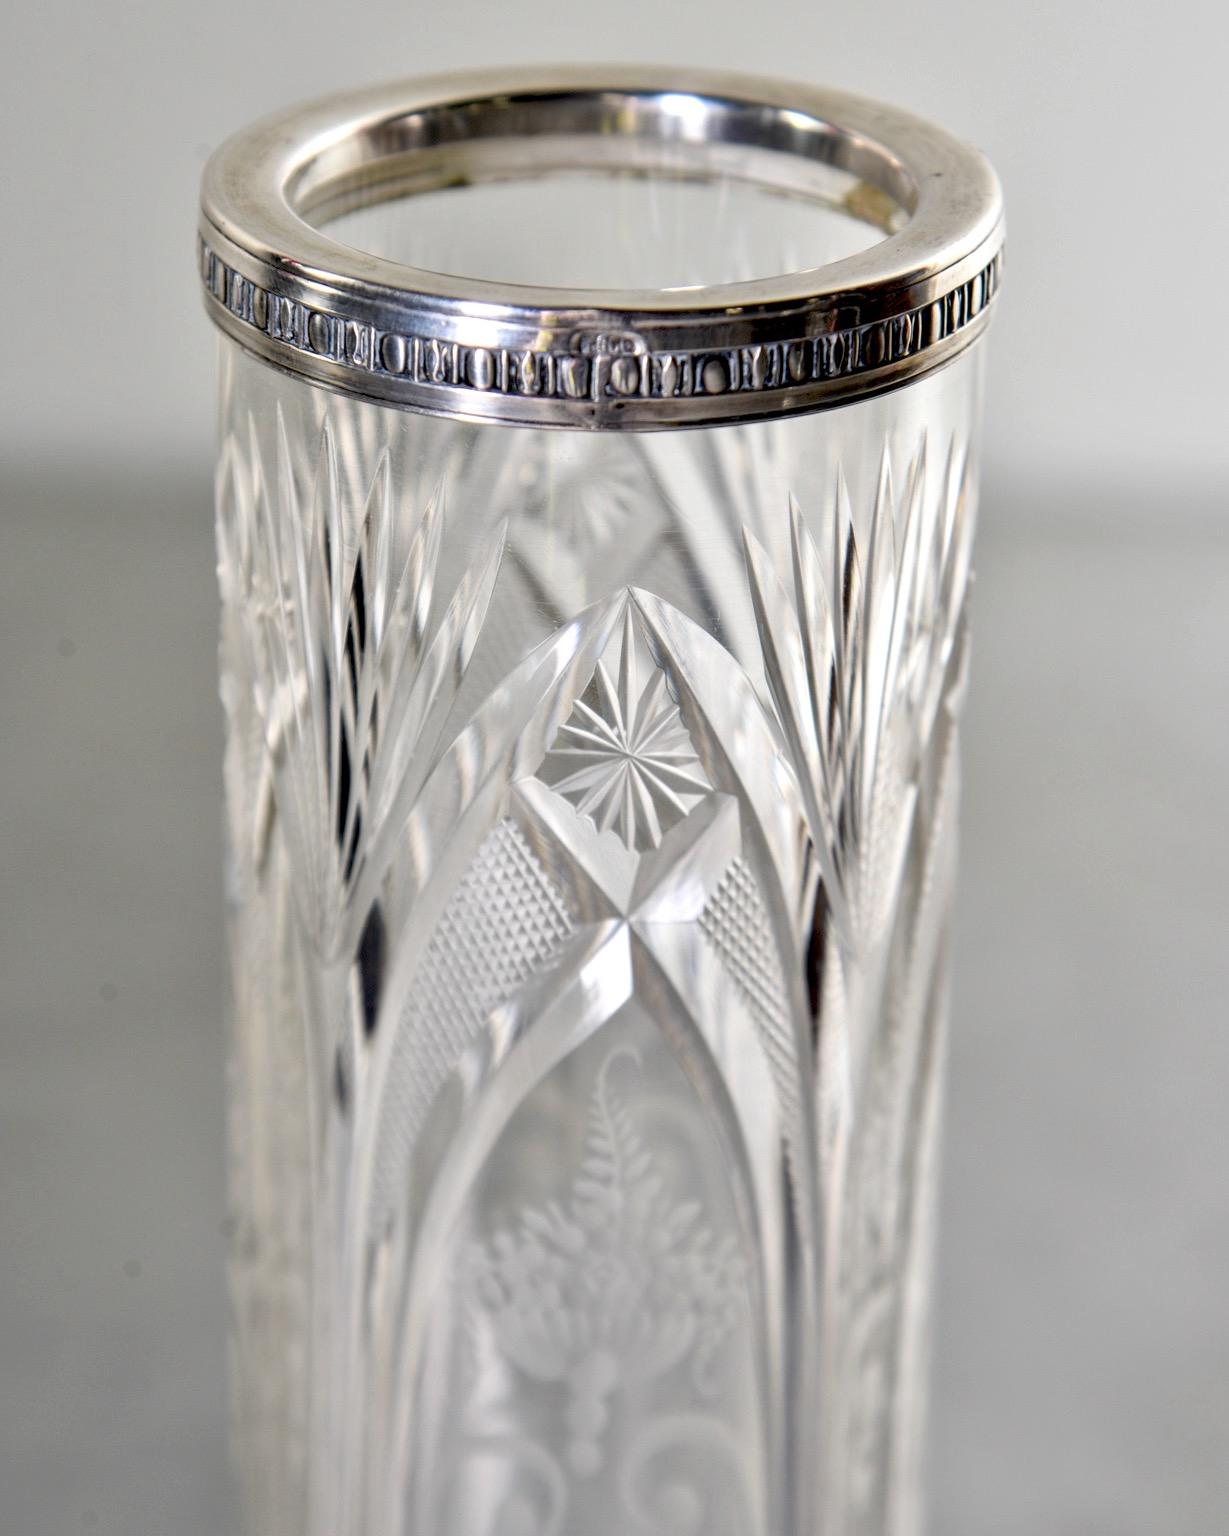 European Art Deco Etched Crystal Vase with Sterling Rim and Base  